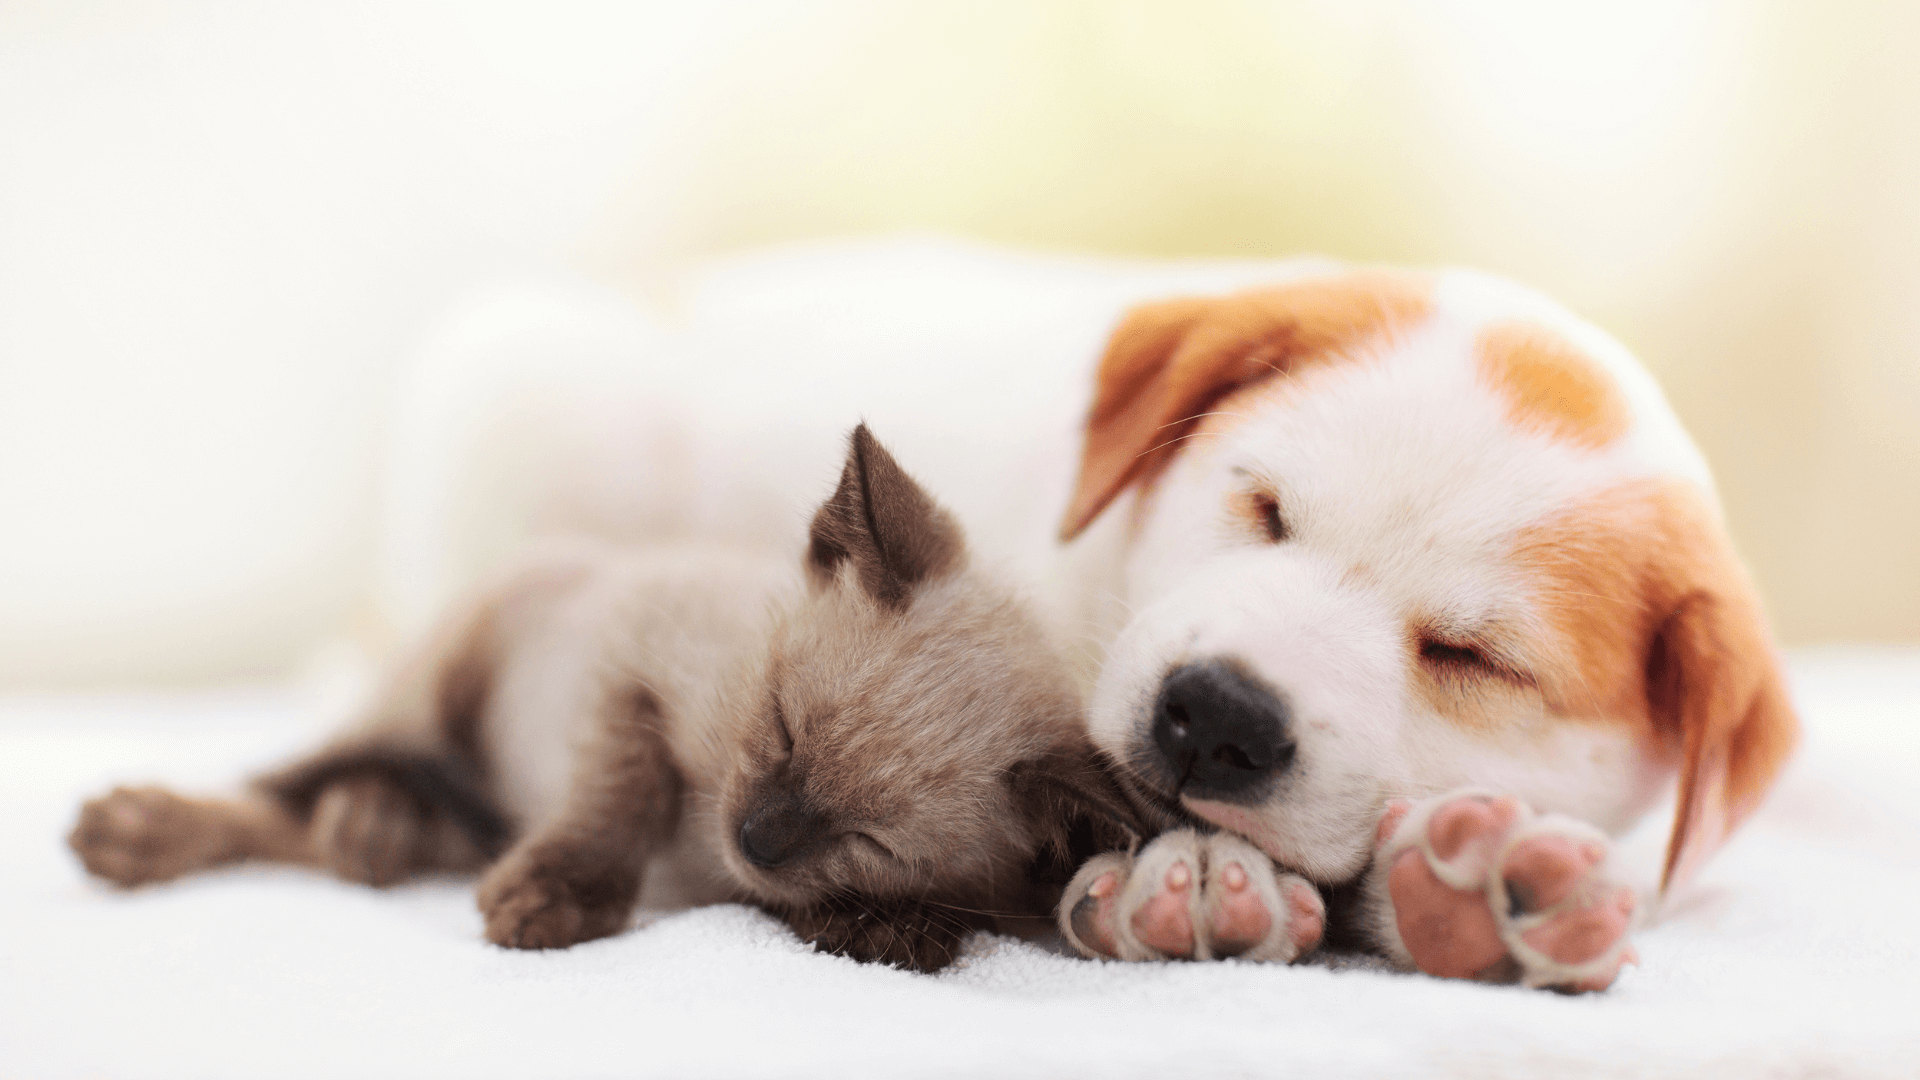 A puppy and kitten lying together